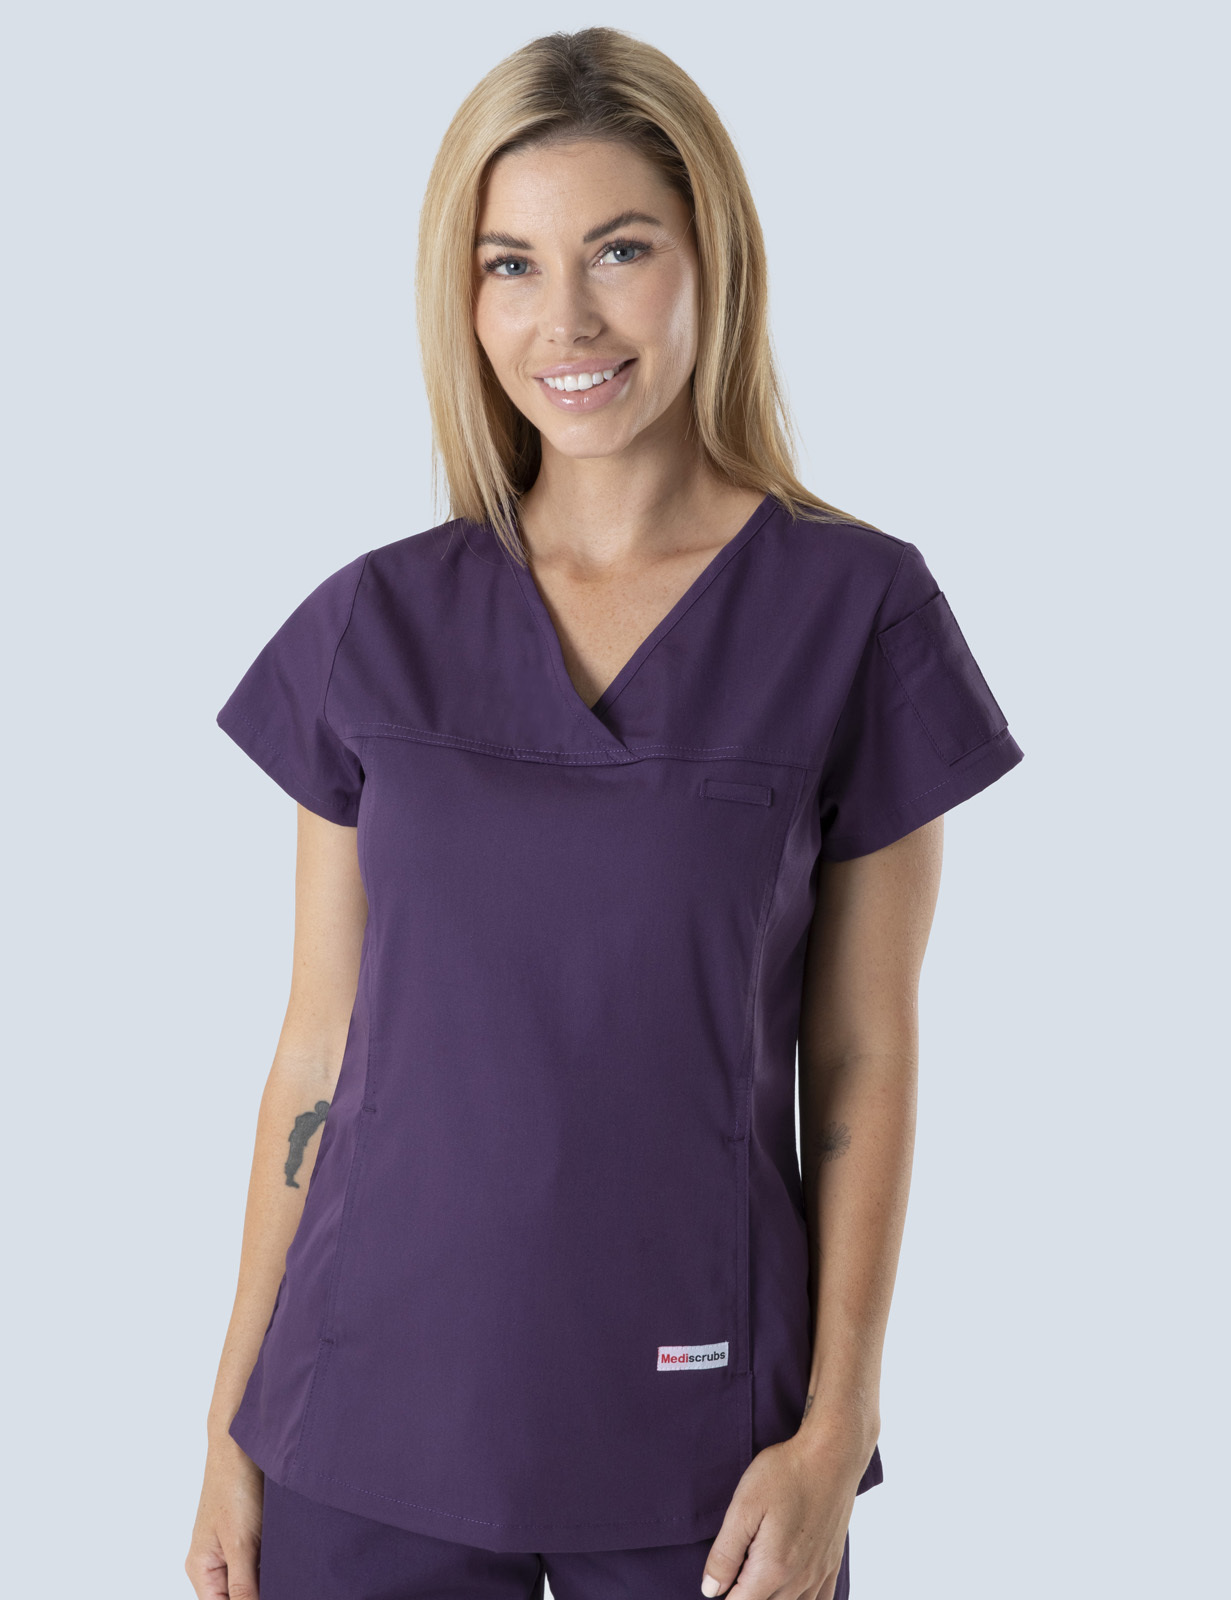 Ipswich Hospital HITH Uniform Top Only Bundle ( Women's Fit Solid Top in Aubergine incl Logos)